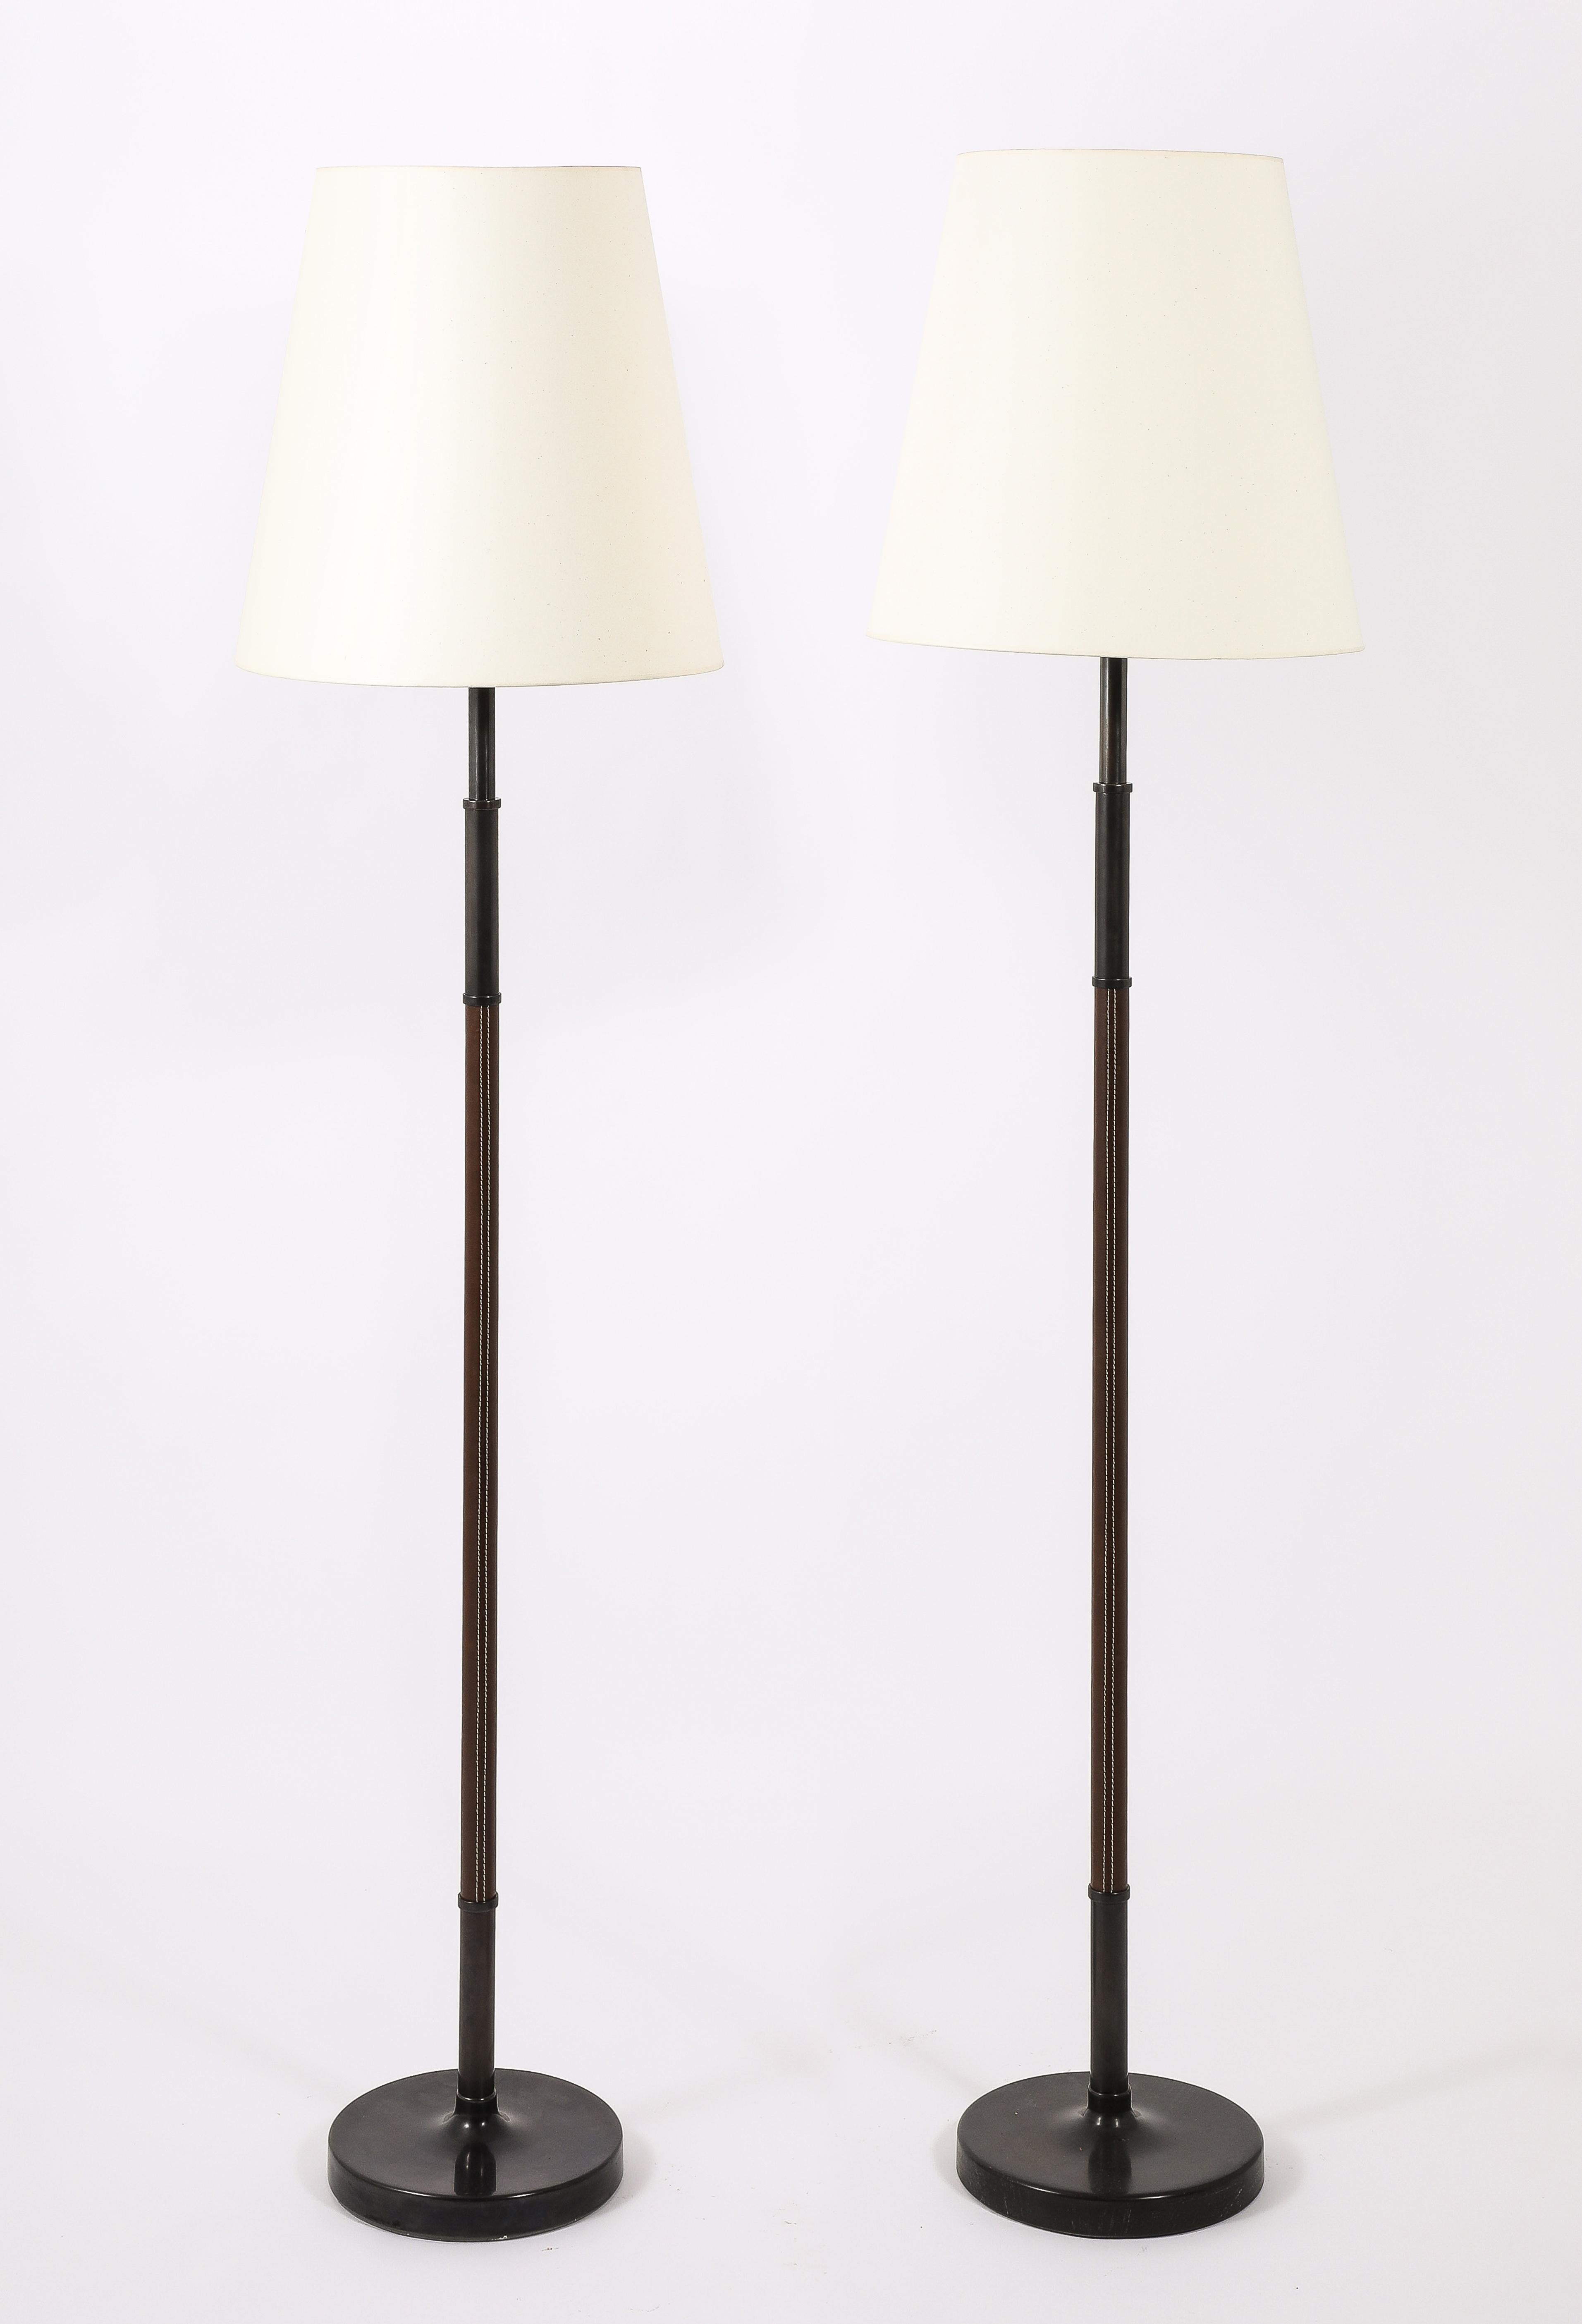 A pair of floor lamps by MetalArte Wrapped in a Chocolate leather, on heavy bronze bases. Signed on the counterweight.
